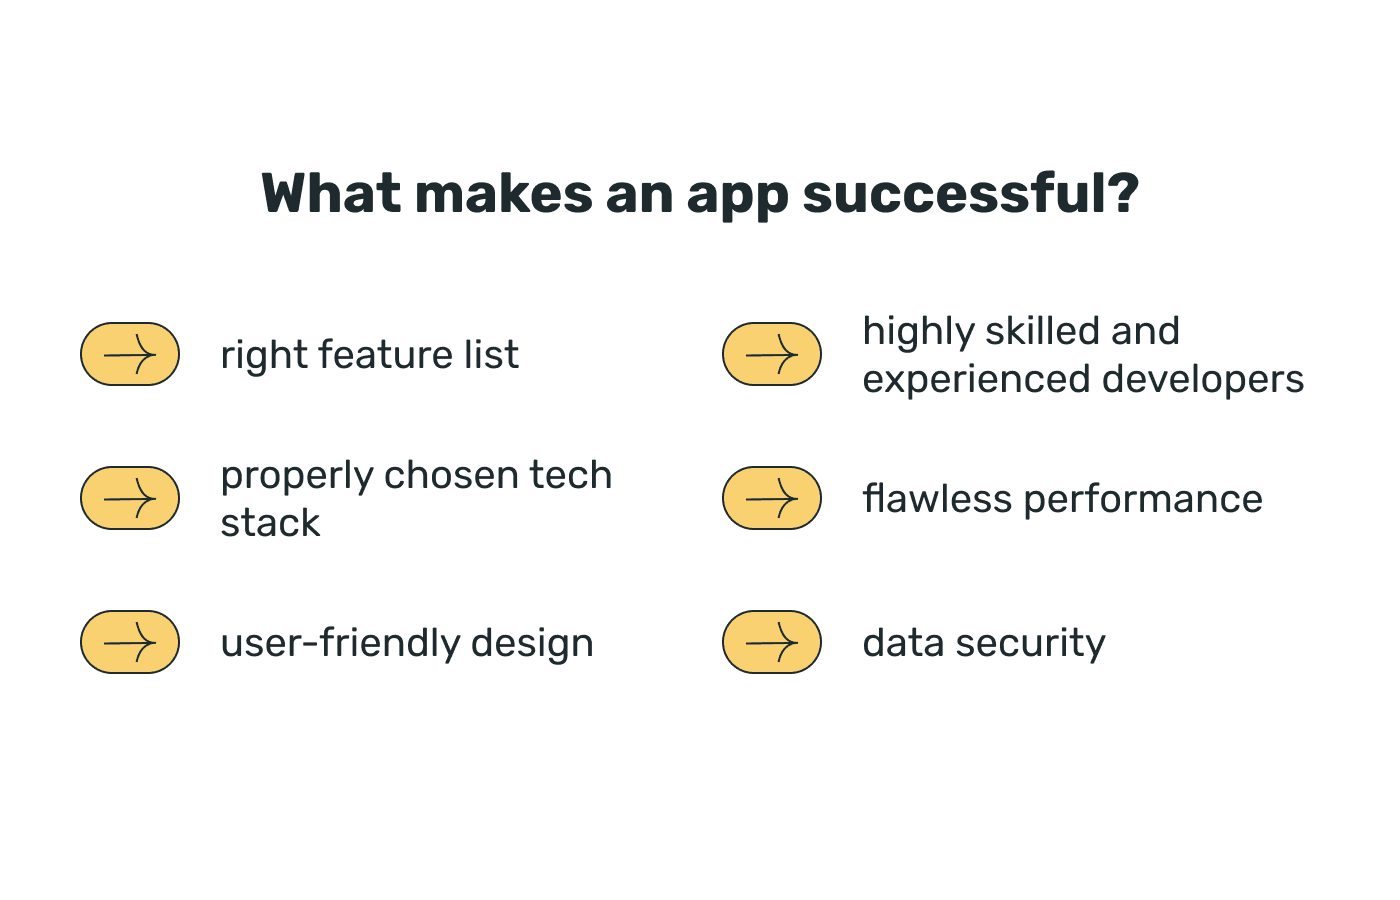 What makes an app successful